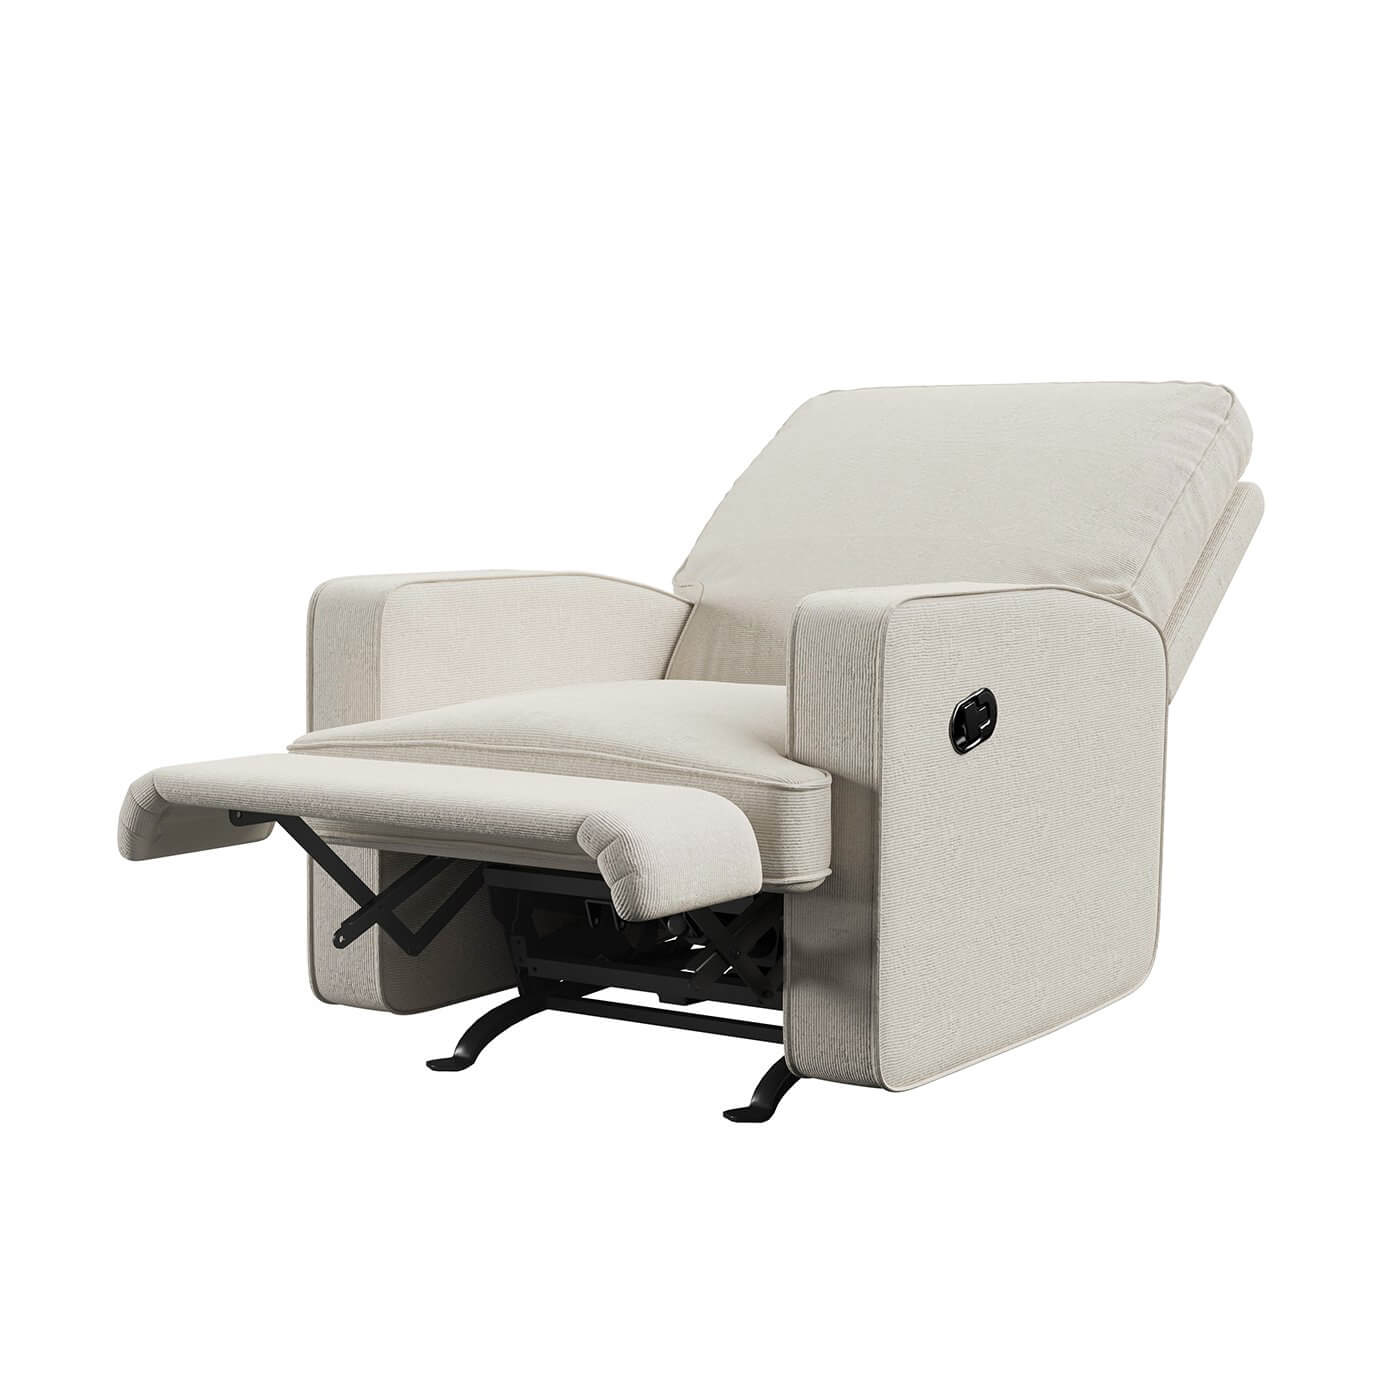 3D Visualization of Recliner Chair Configuration